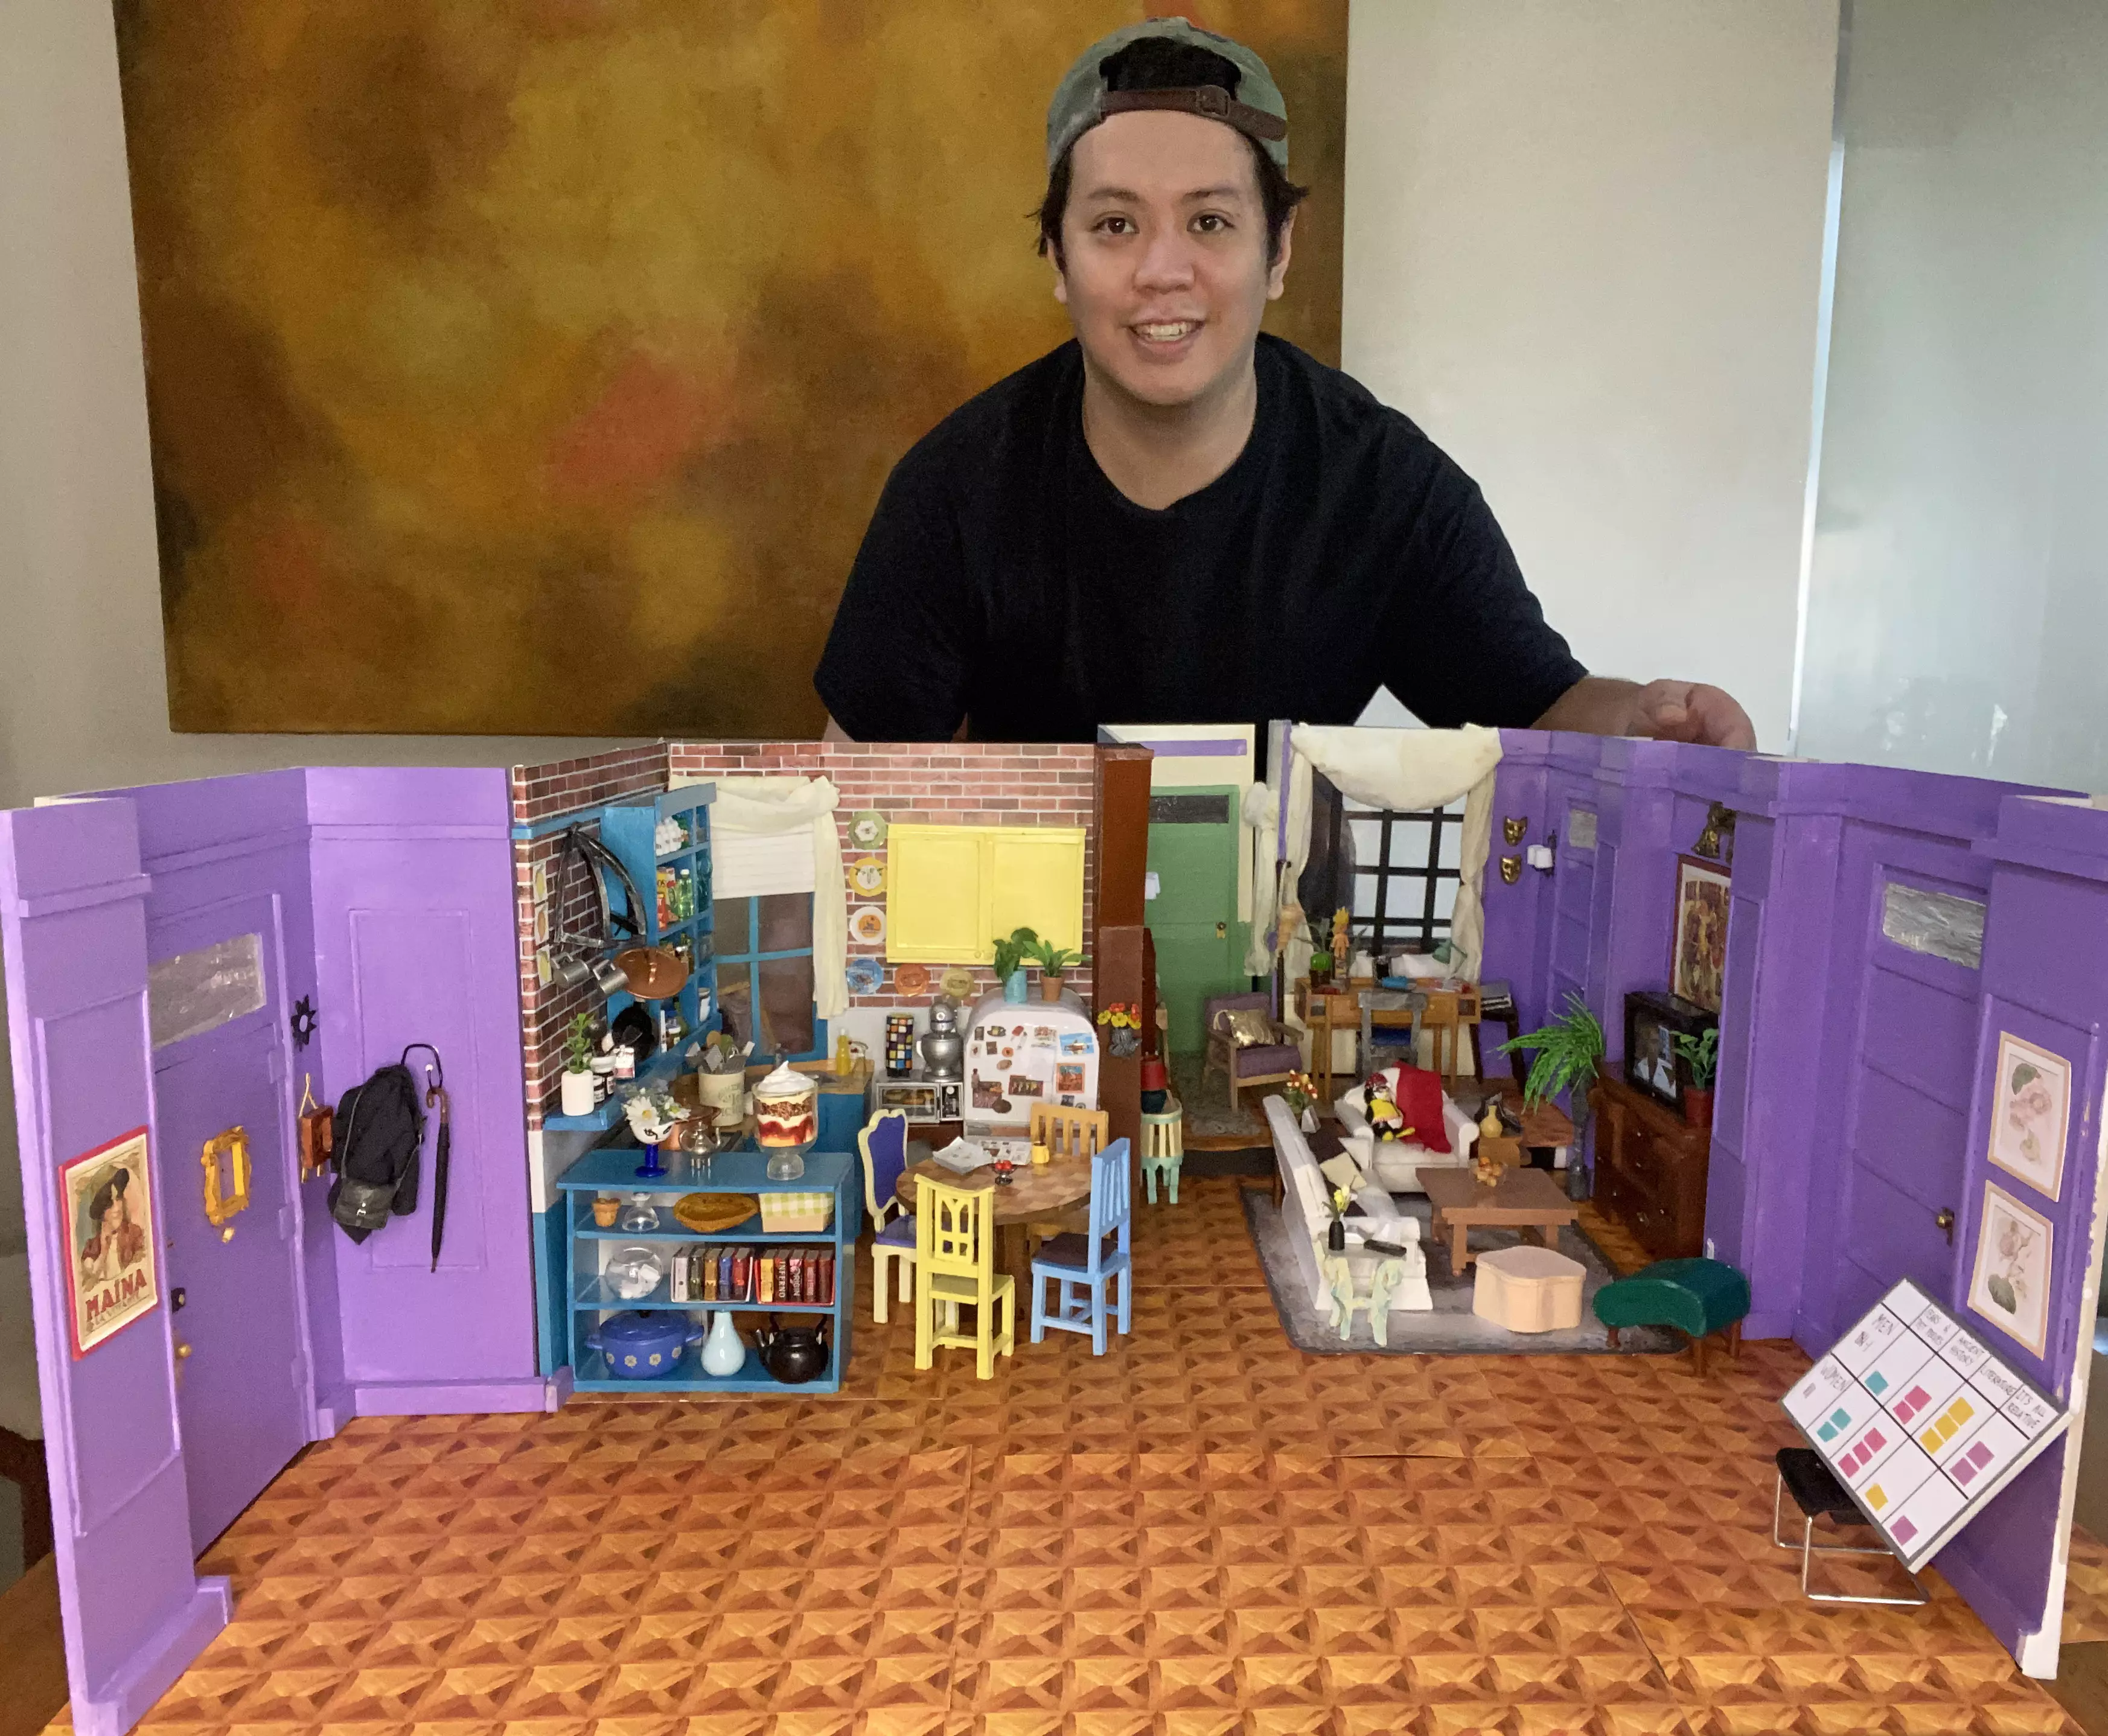 Man Spends Lockdown Building Exact Replica Of Apartment From Friends